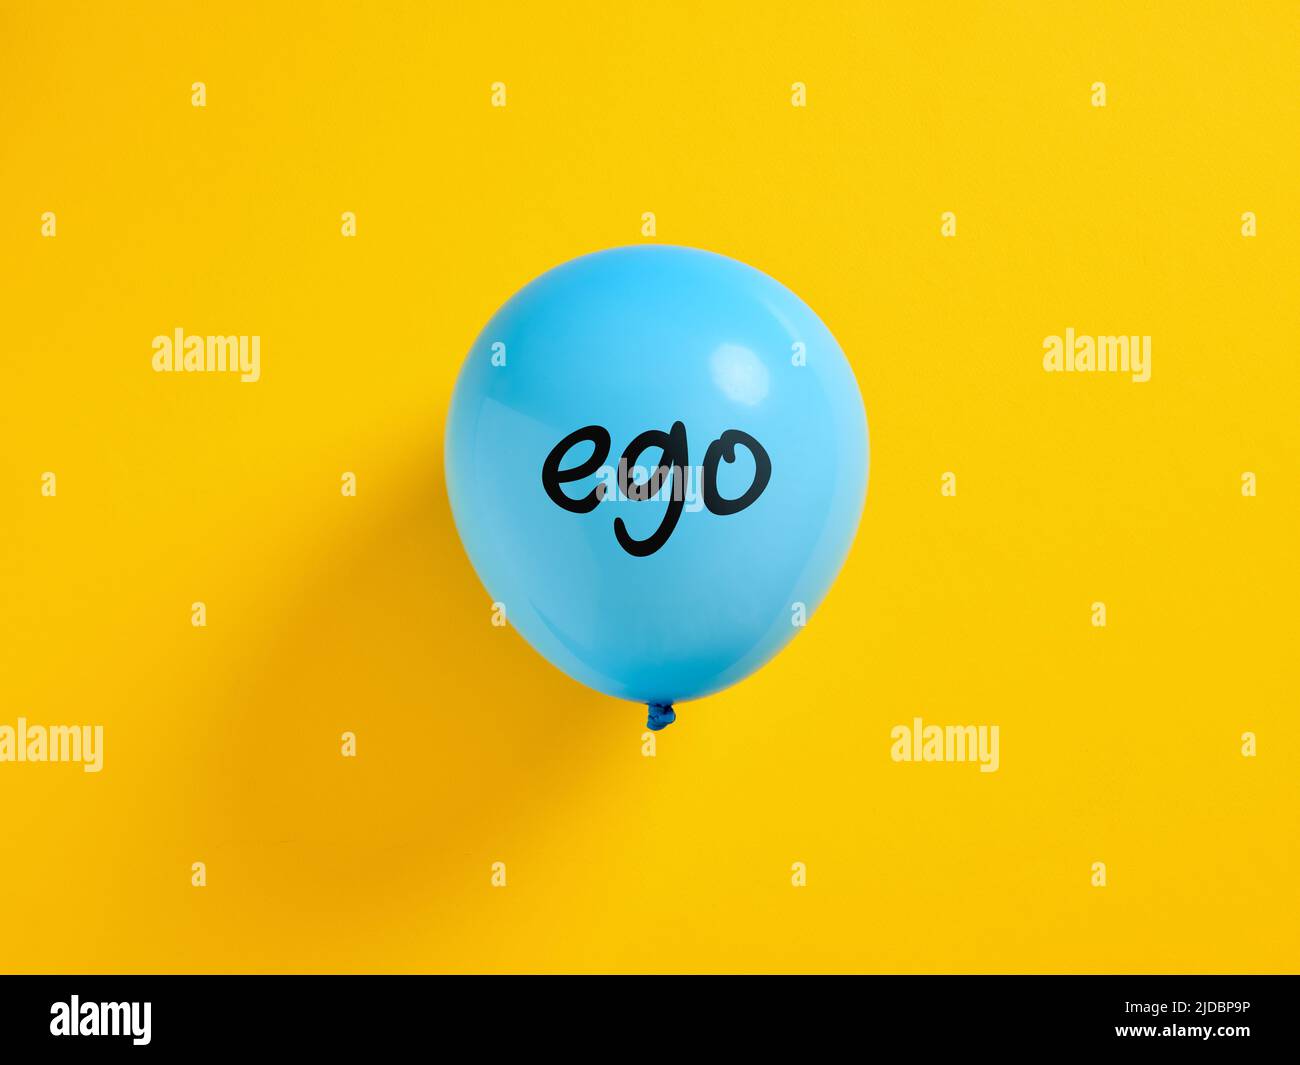 https://c8.alamy.com/comp/2JDBP9P/inflated-blue-balloon-with-the-word-ego-and-a-pin-selfishness-or-inflated-extreme-ego-concept-2JDBP9P.jpg